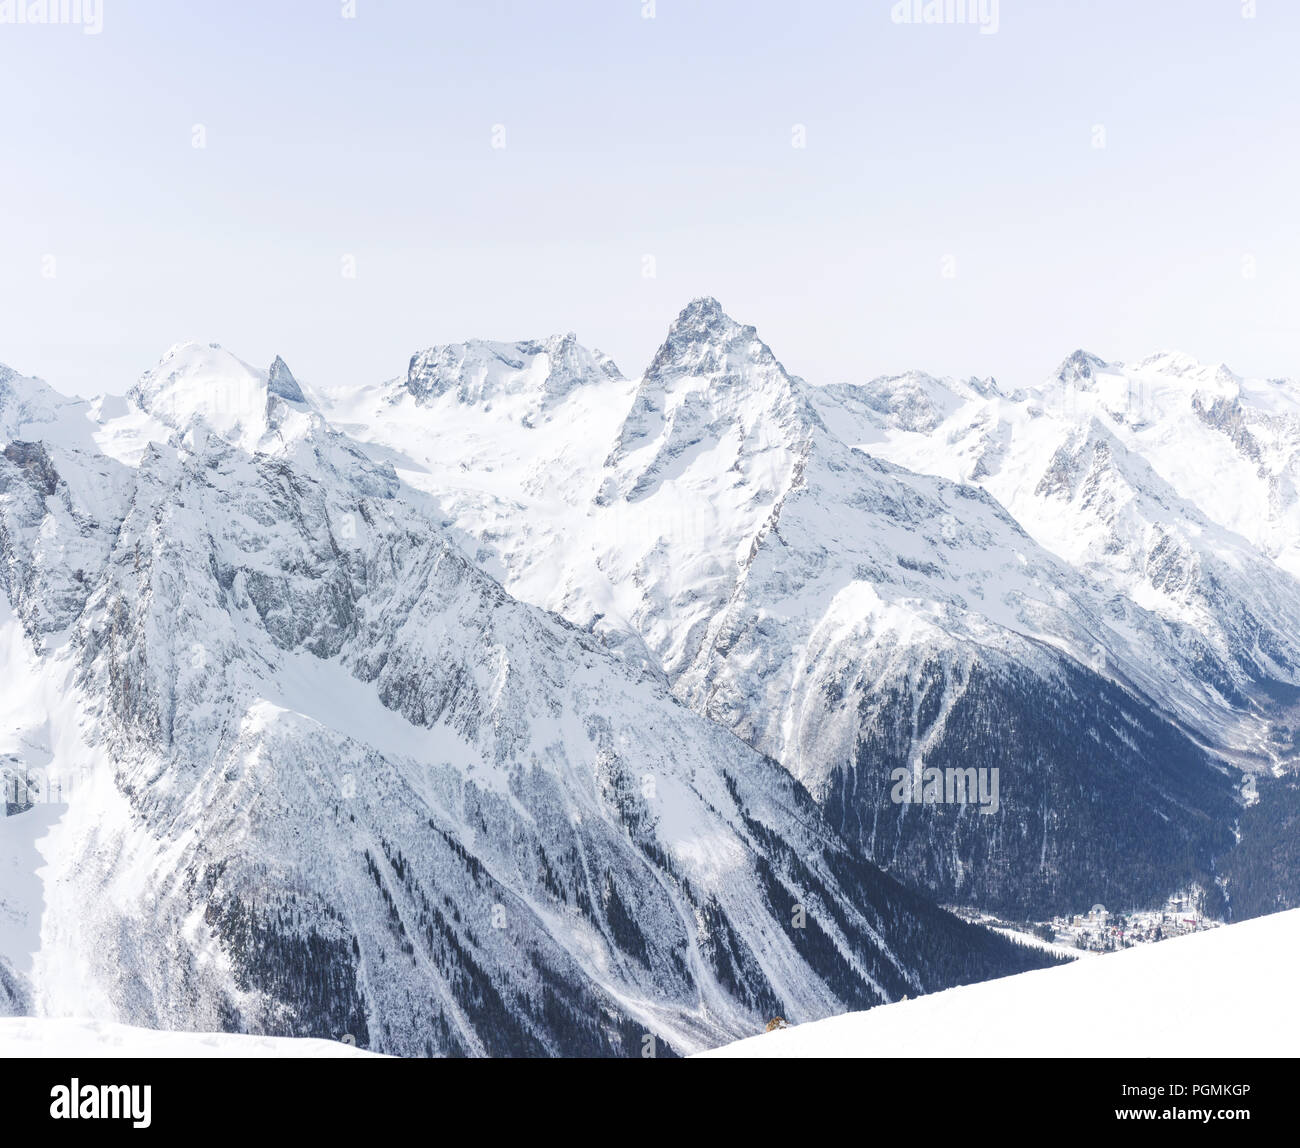 Mountain winter landscape with white peaks. Lifestyle is active, hiking, tourism. Picturesque landscapes of the Alpine mountains in the snow season. Stock Photo